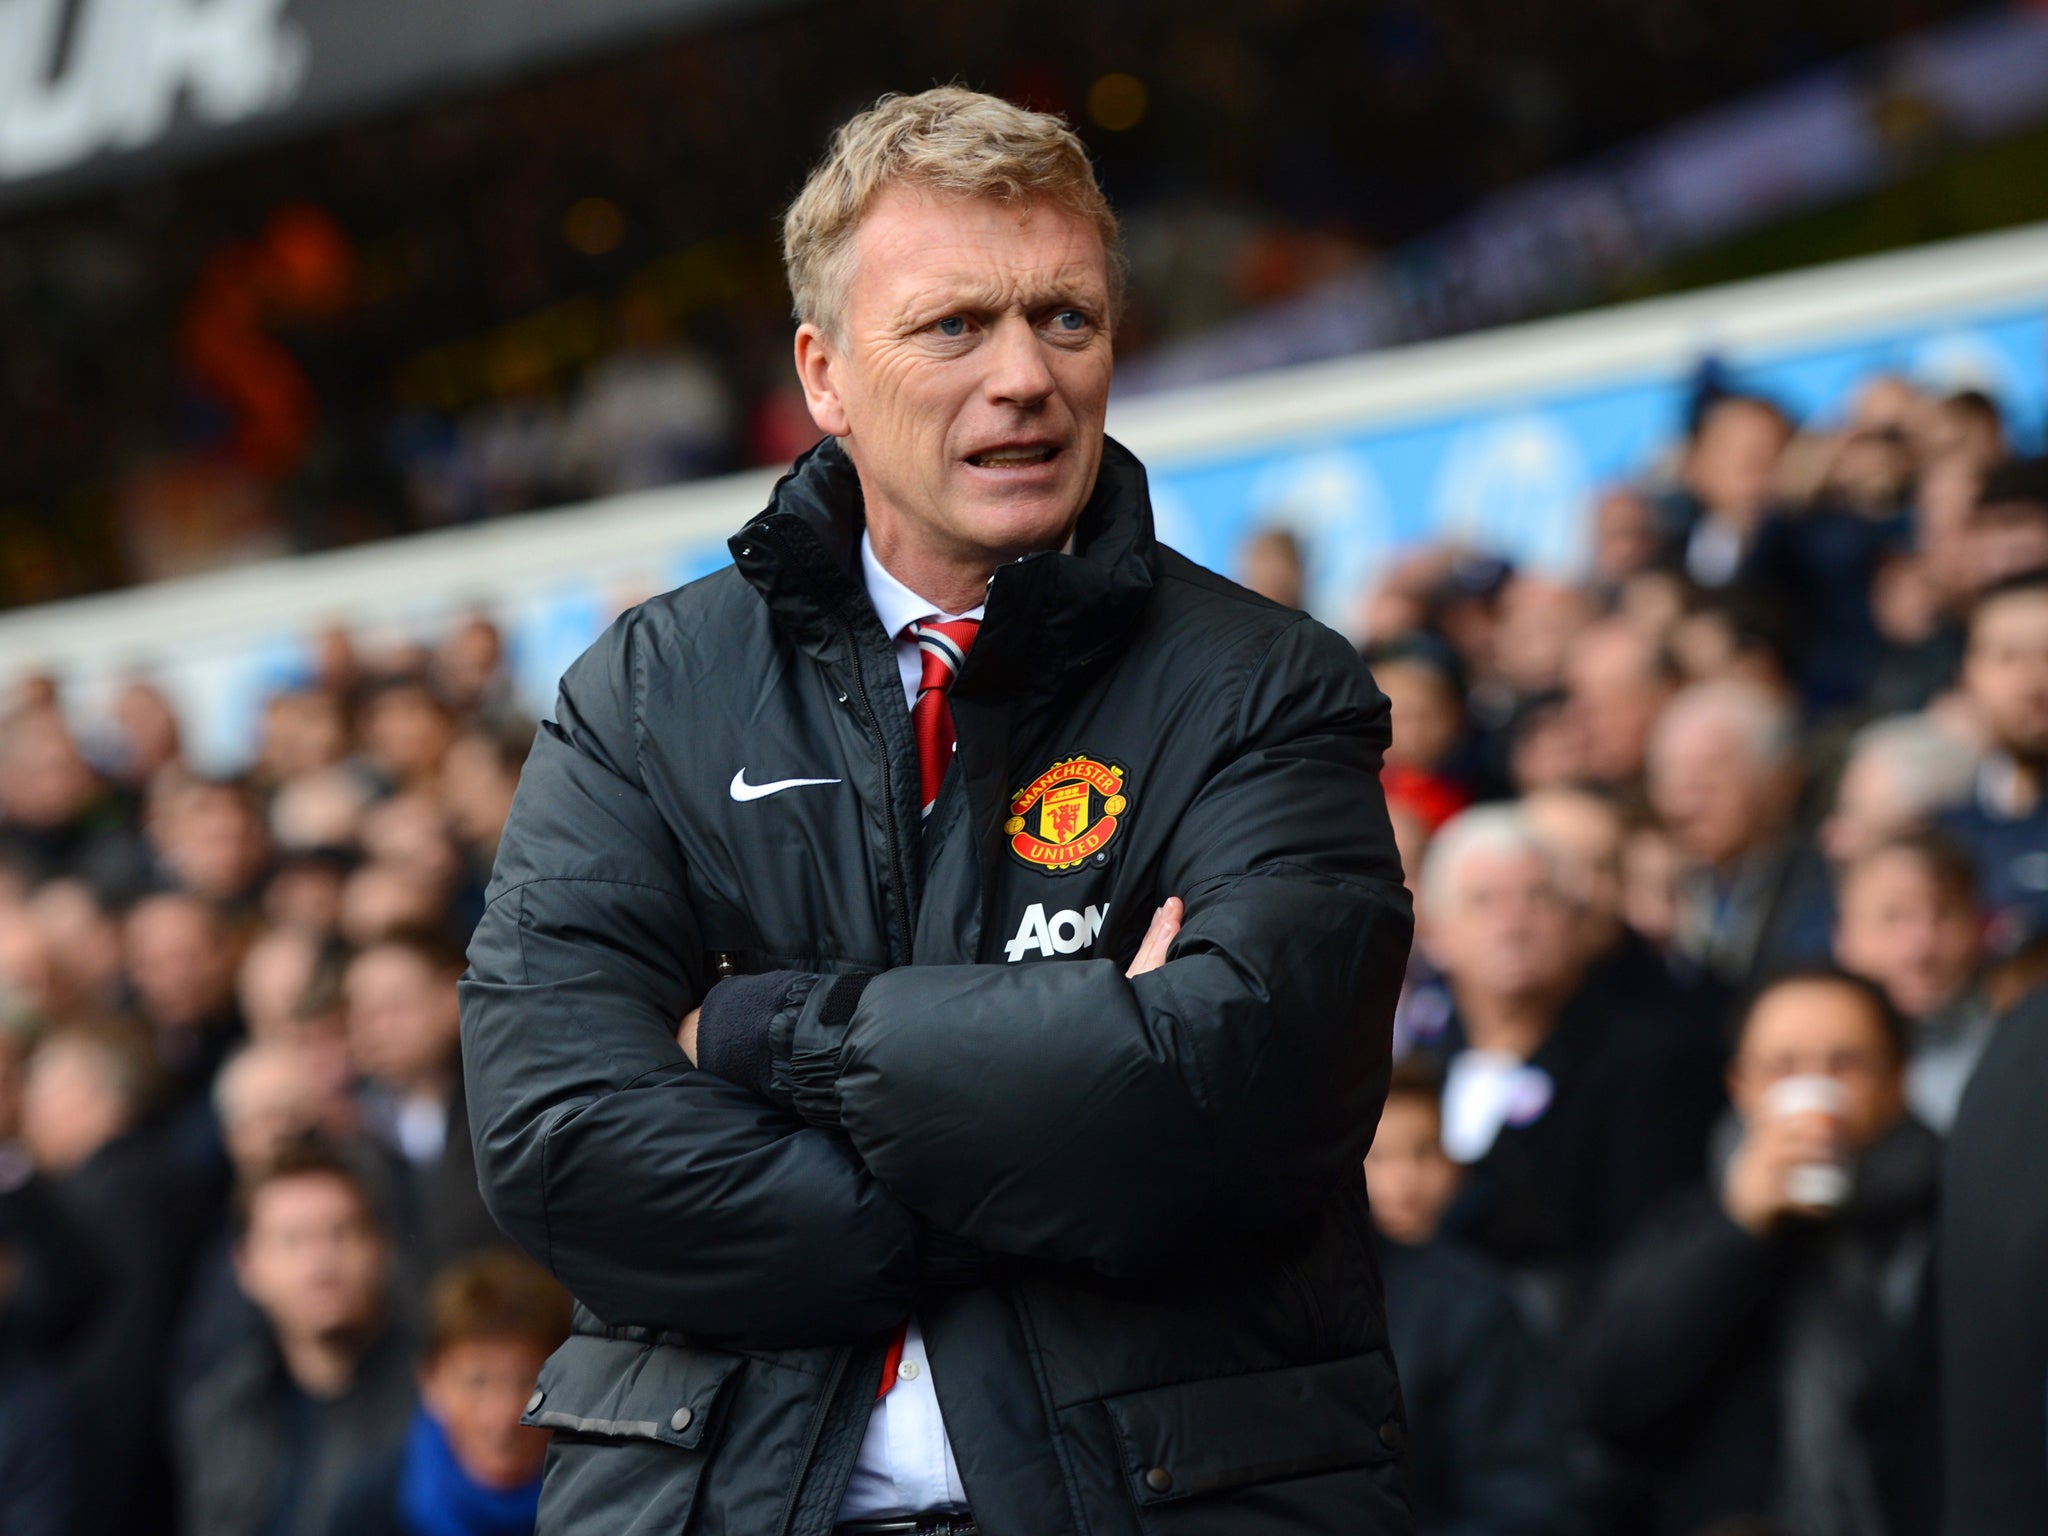 David Moyes takes on his old side Everton